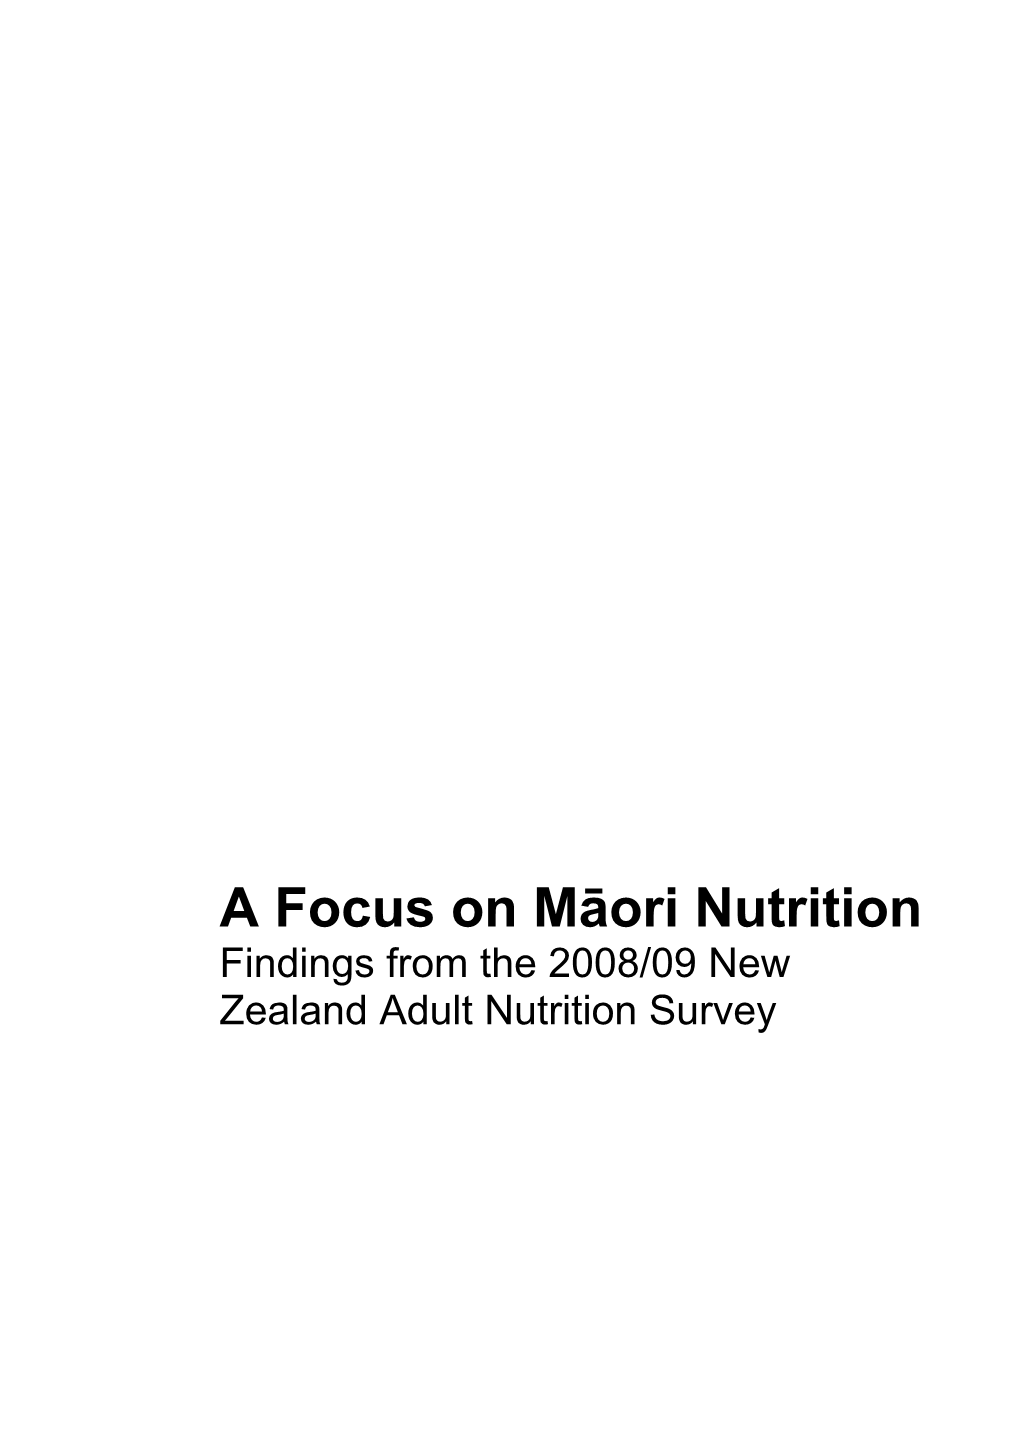 Findings from the 2008/09 New Zealand Adult Nutrition Survey